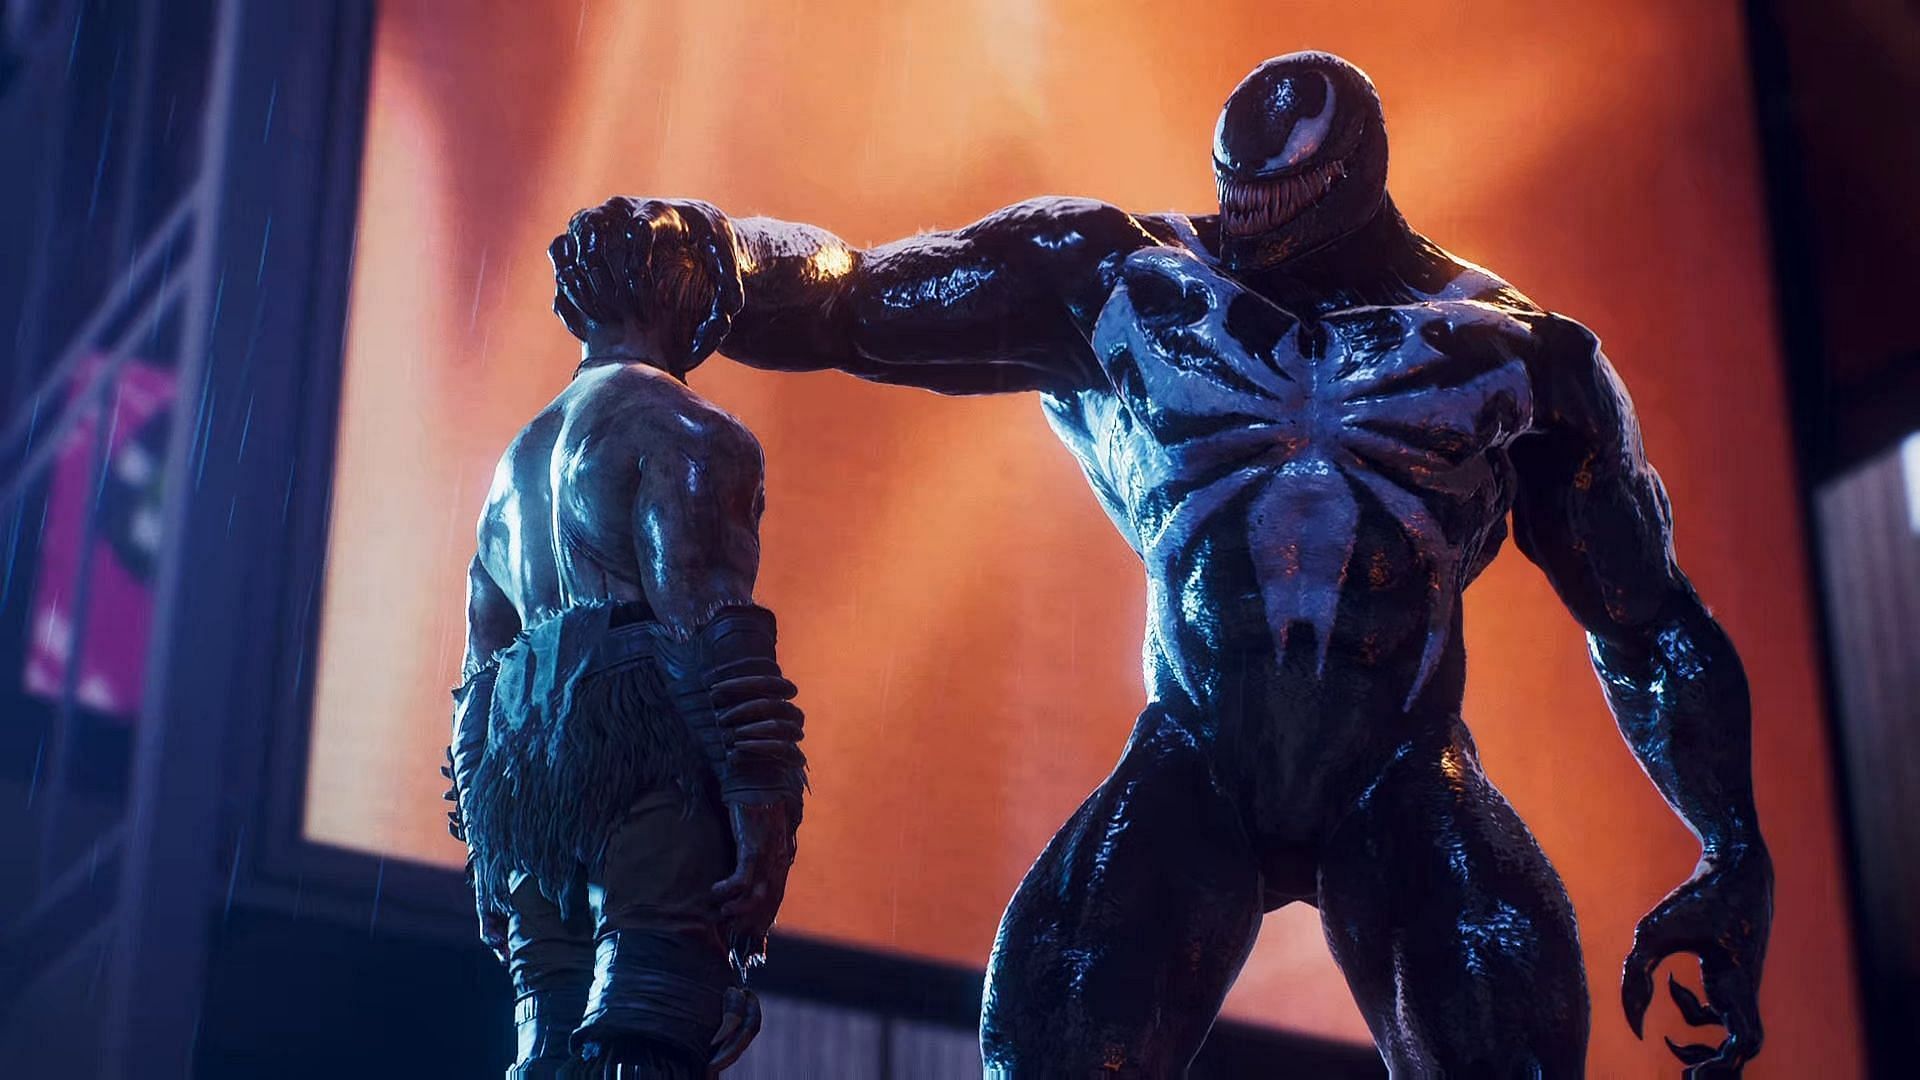 You can play as Venom in Spider-Man 2 (Image via Insomniac Games)